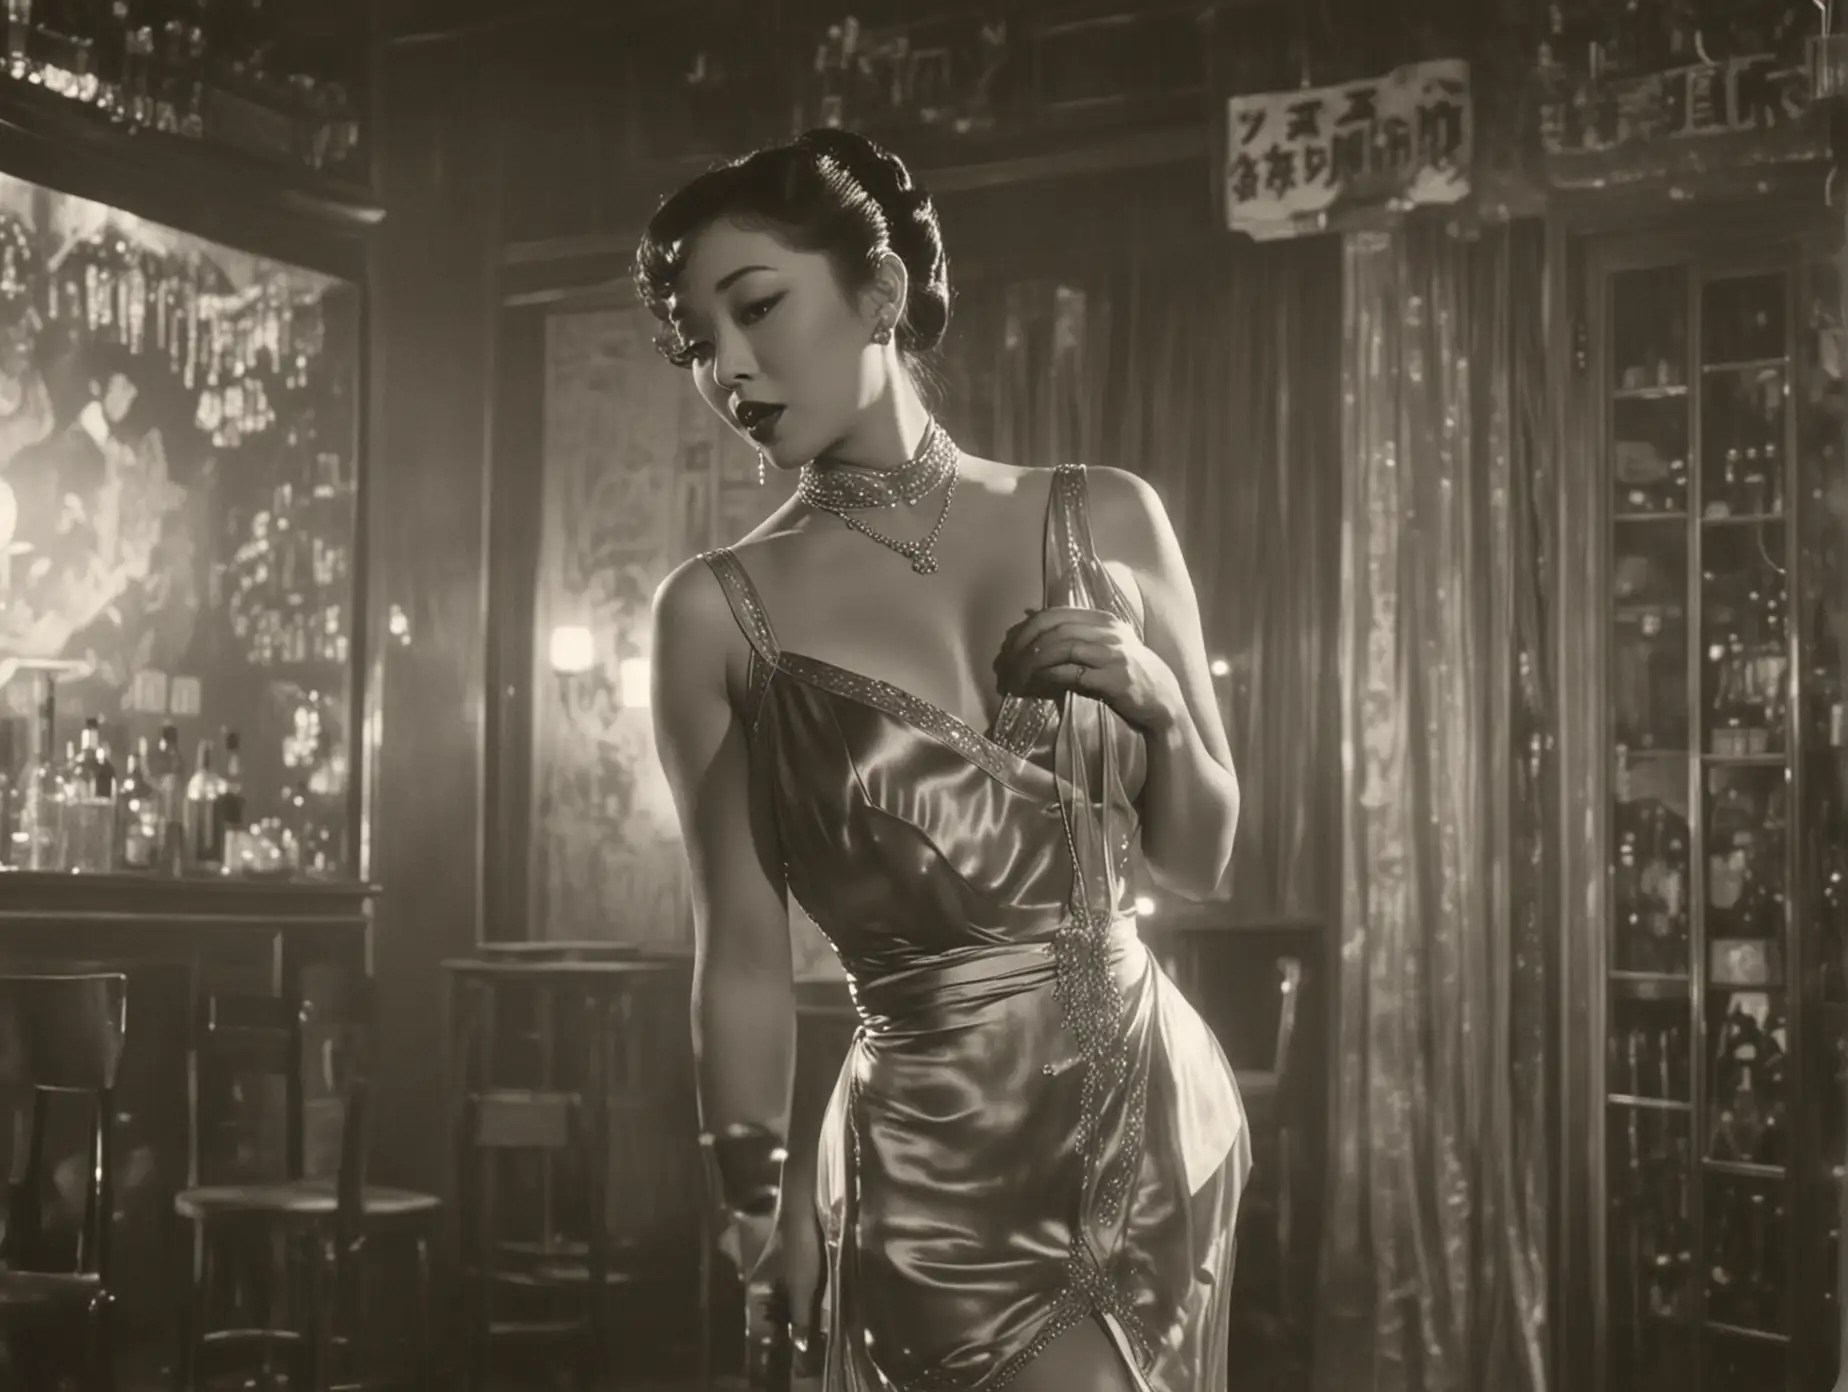 photographic still from a pre-code film, with a female singer in a short silk gown and stockings, in a small Chinese-themed nightclub, sensual grainy feel